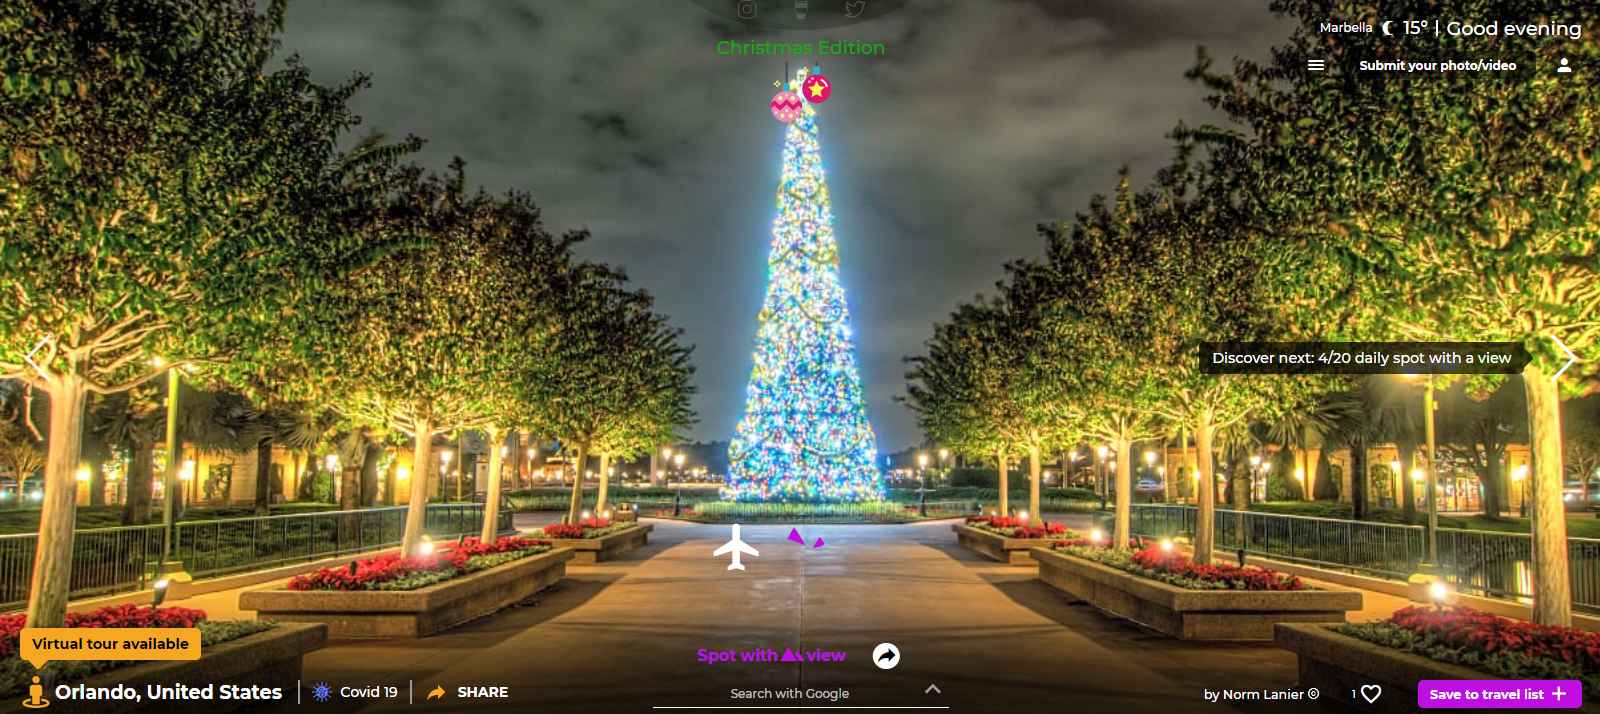 Take A Virtual Christmas Tour Of The World From Home